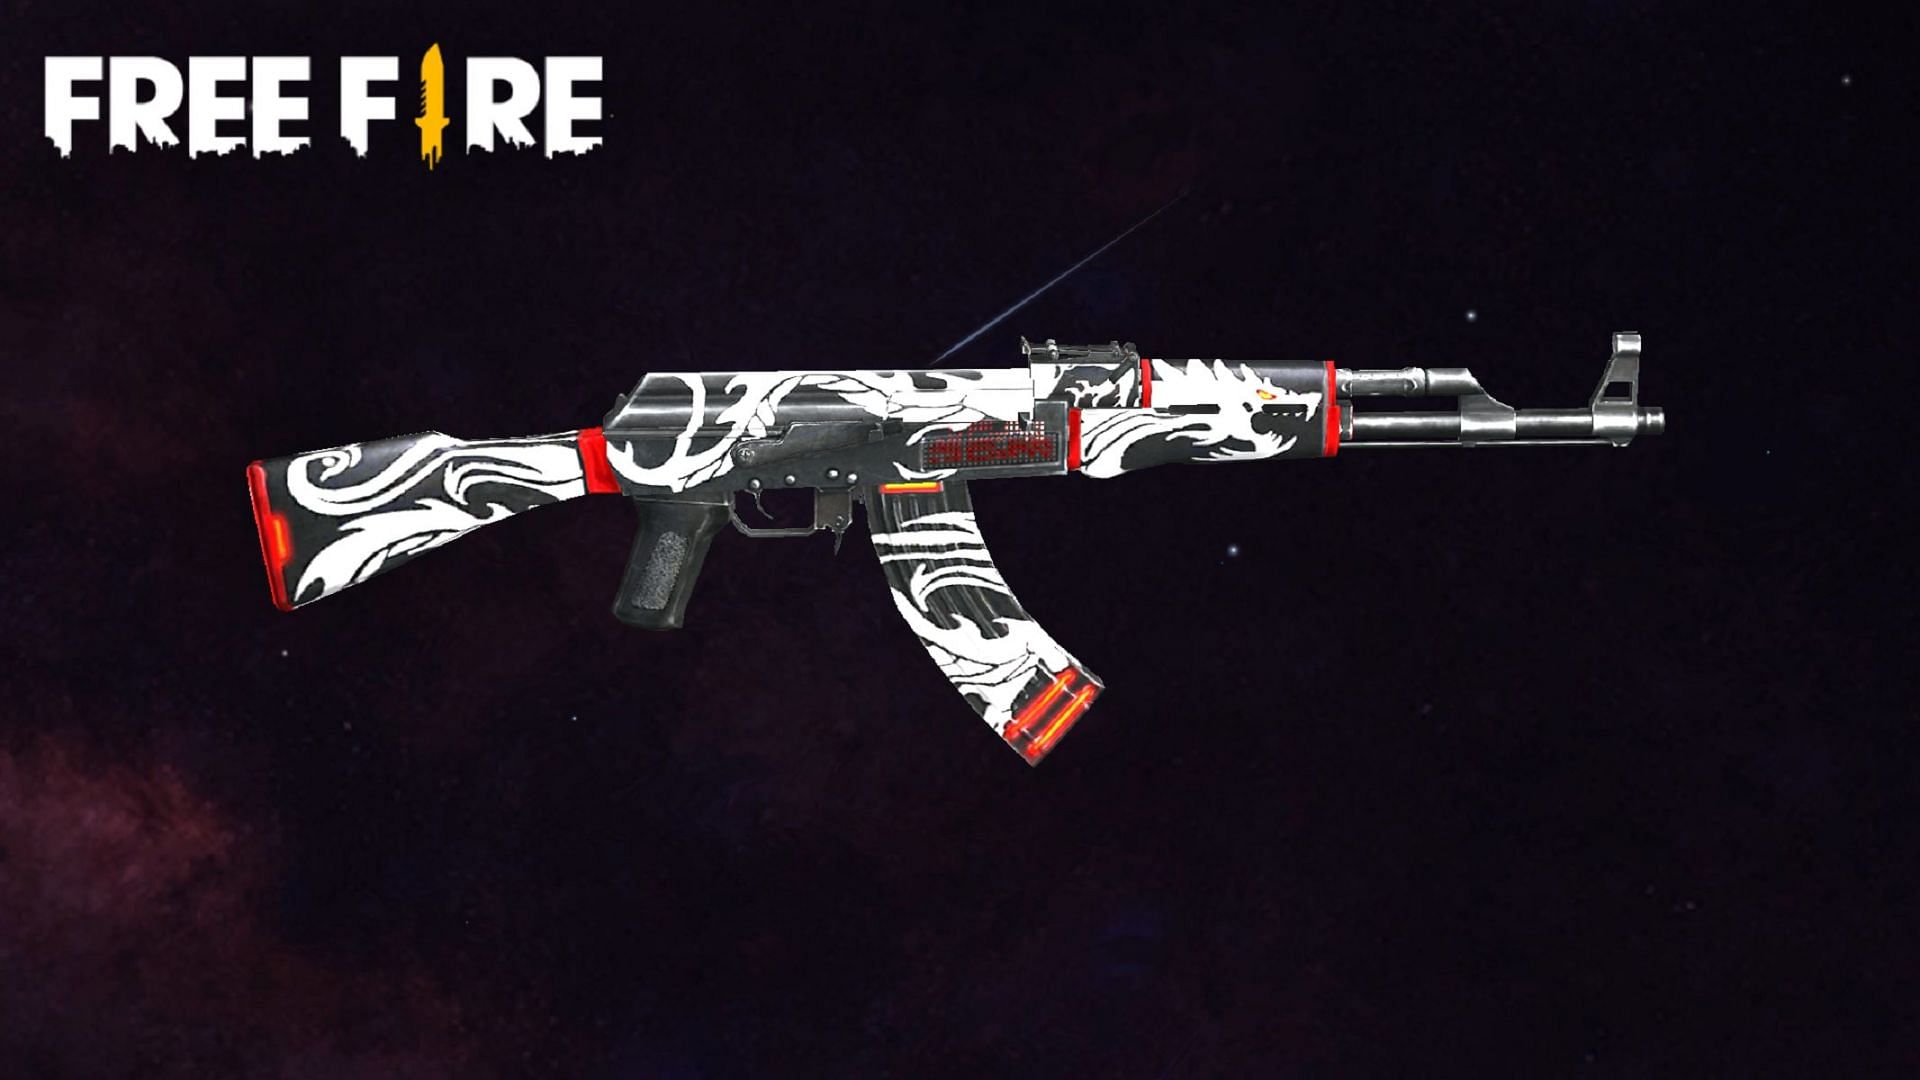 Gamers stand a chance to get permanent gun skin by opening the crate (Image via Free Fire)